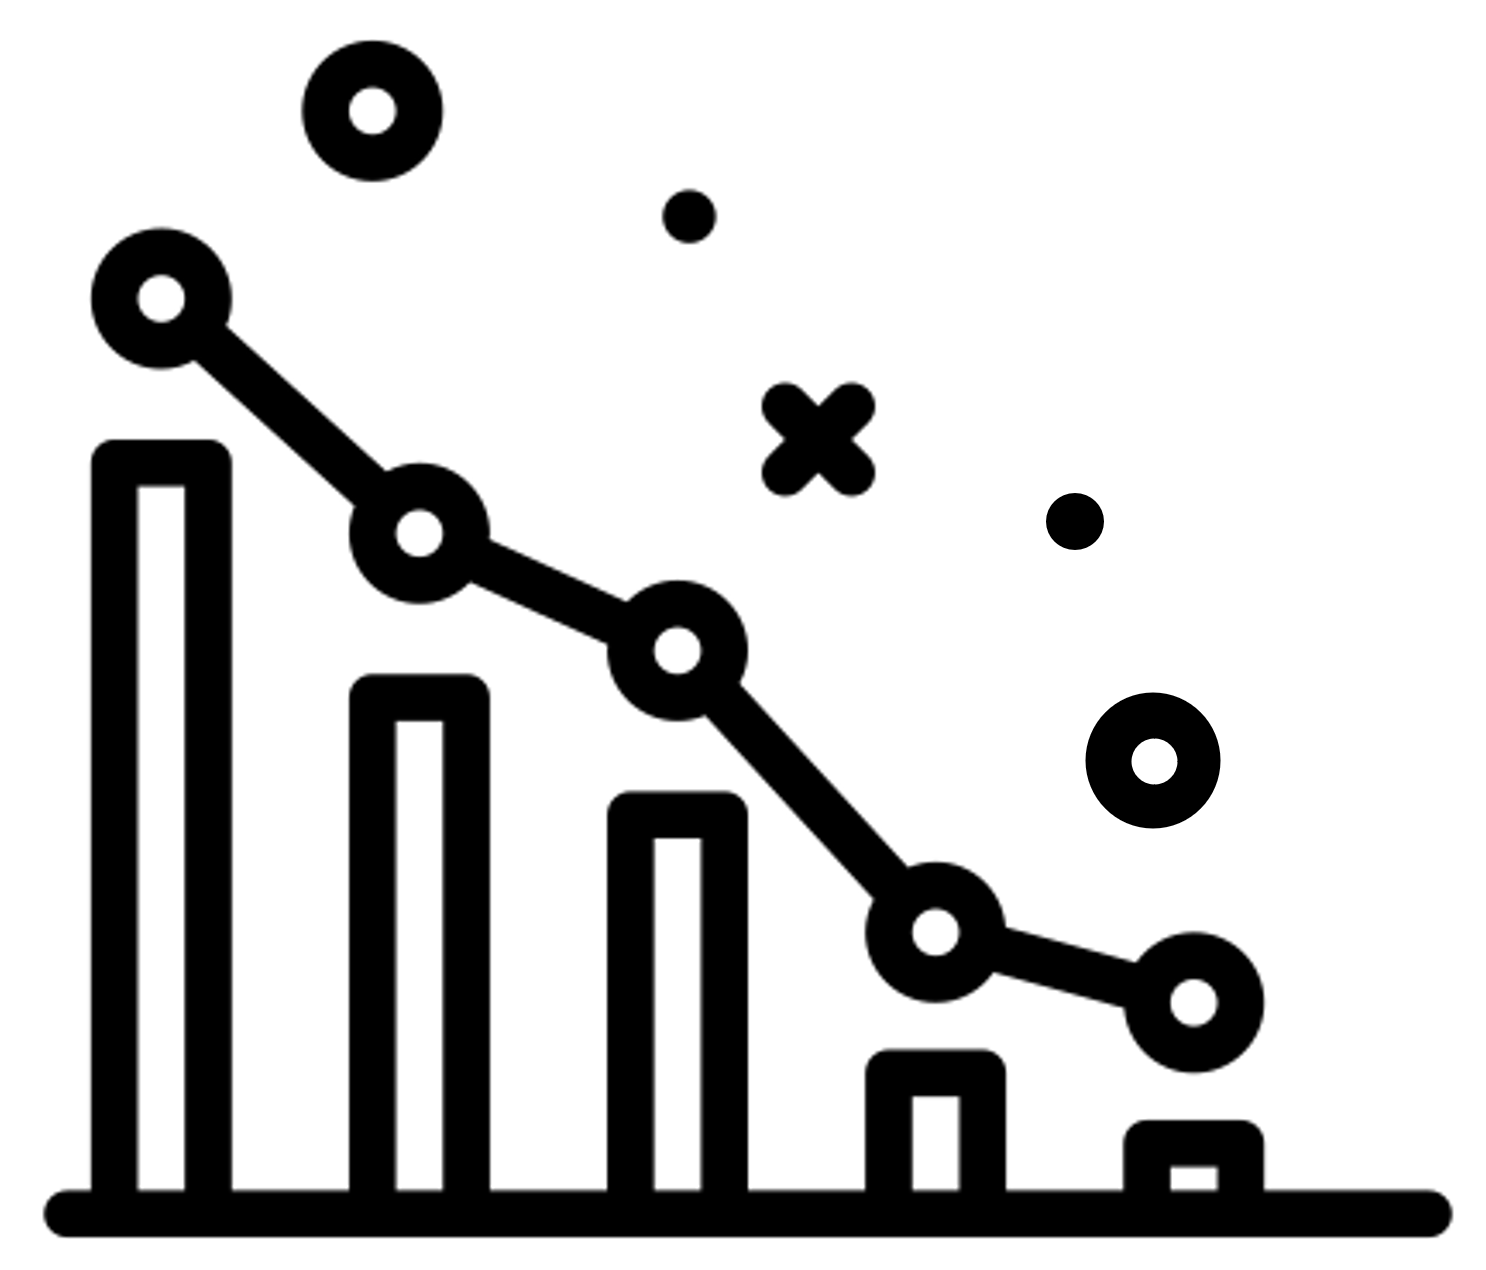 An example of a bar graph and line graph data visualization depicting a decreasing trend.